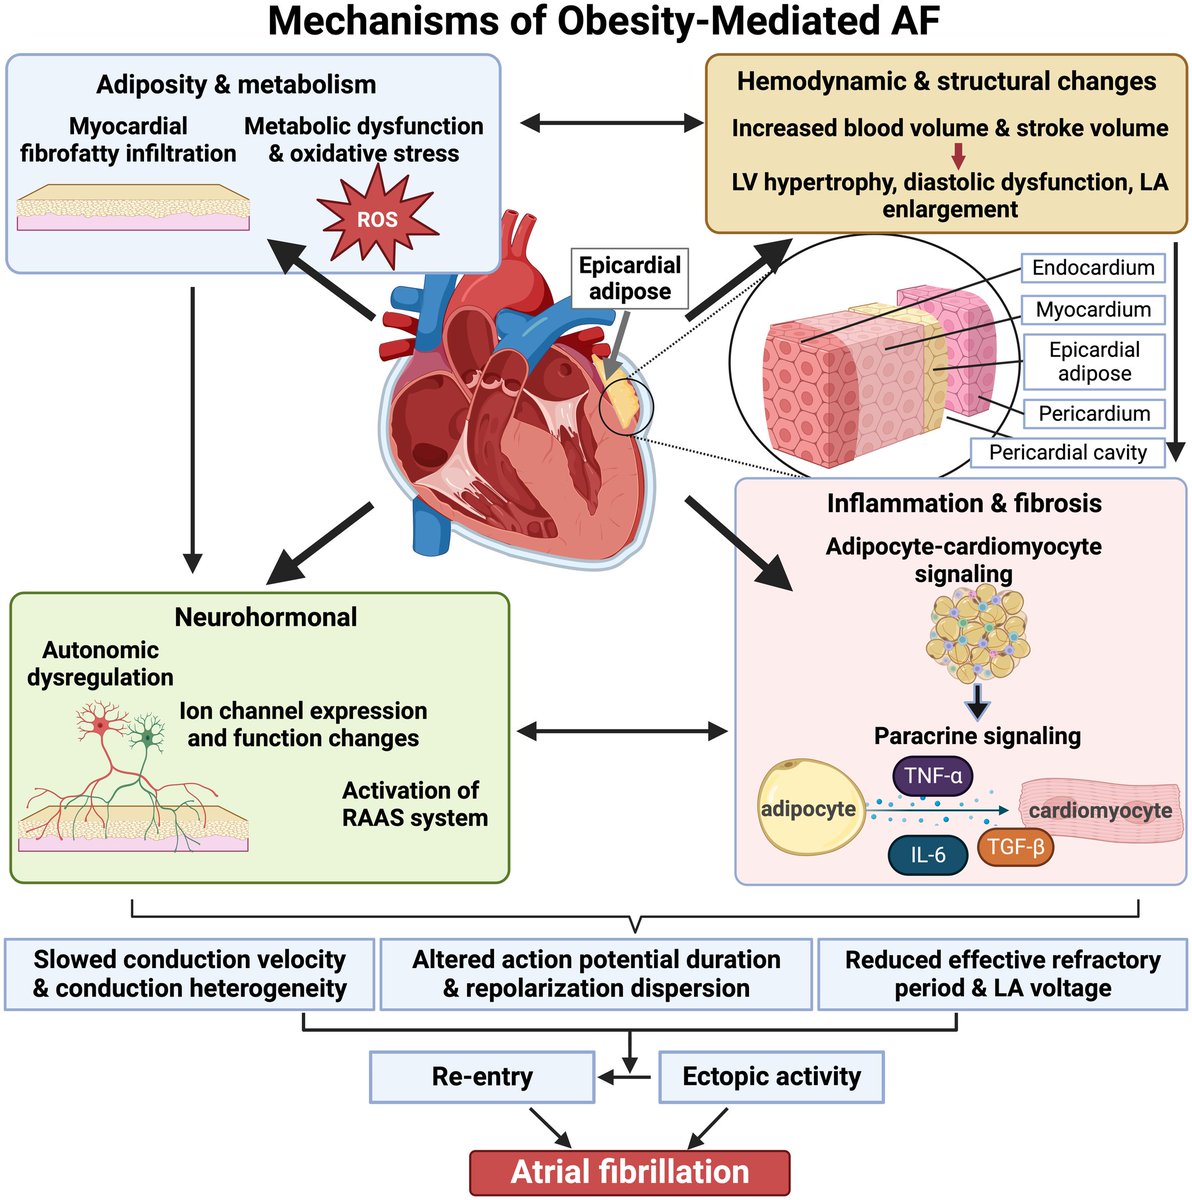 Our review on 'Impact of #Obesity on #Atrial_Fibrillation Pathogenesis and Treatment Optionsis' is out in @JAHA_AHA please see link below. ahajournals.org/doi/10.1161/JA… Well done to Olivia Baines, @Sharina000, @chrisRJO, Abbie Hayes, Katie Tompkins, Andrew Homes, @manish2107